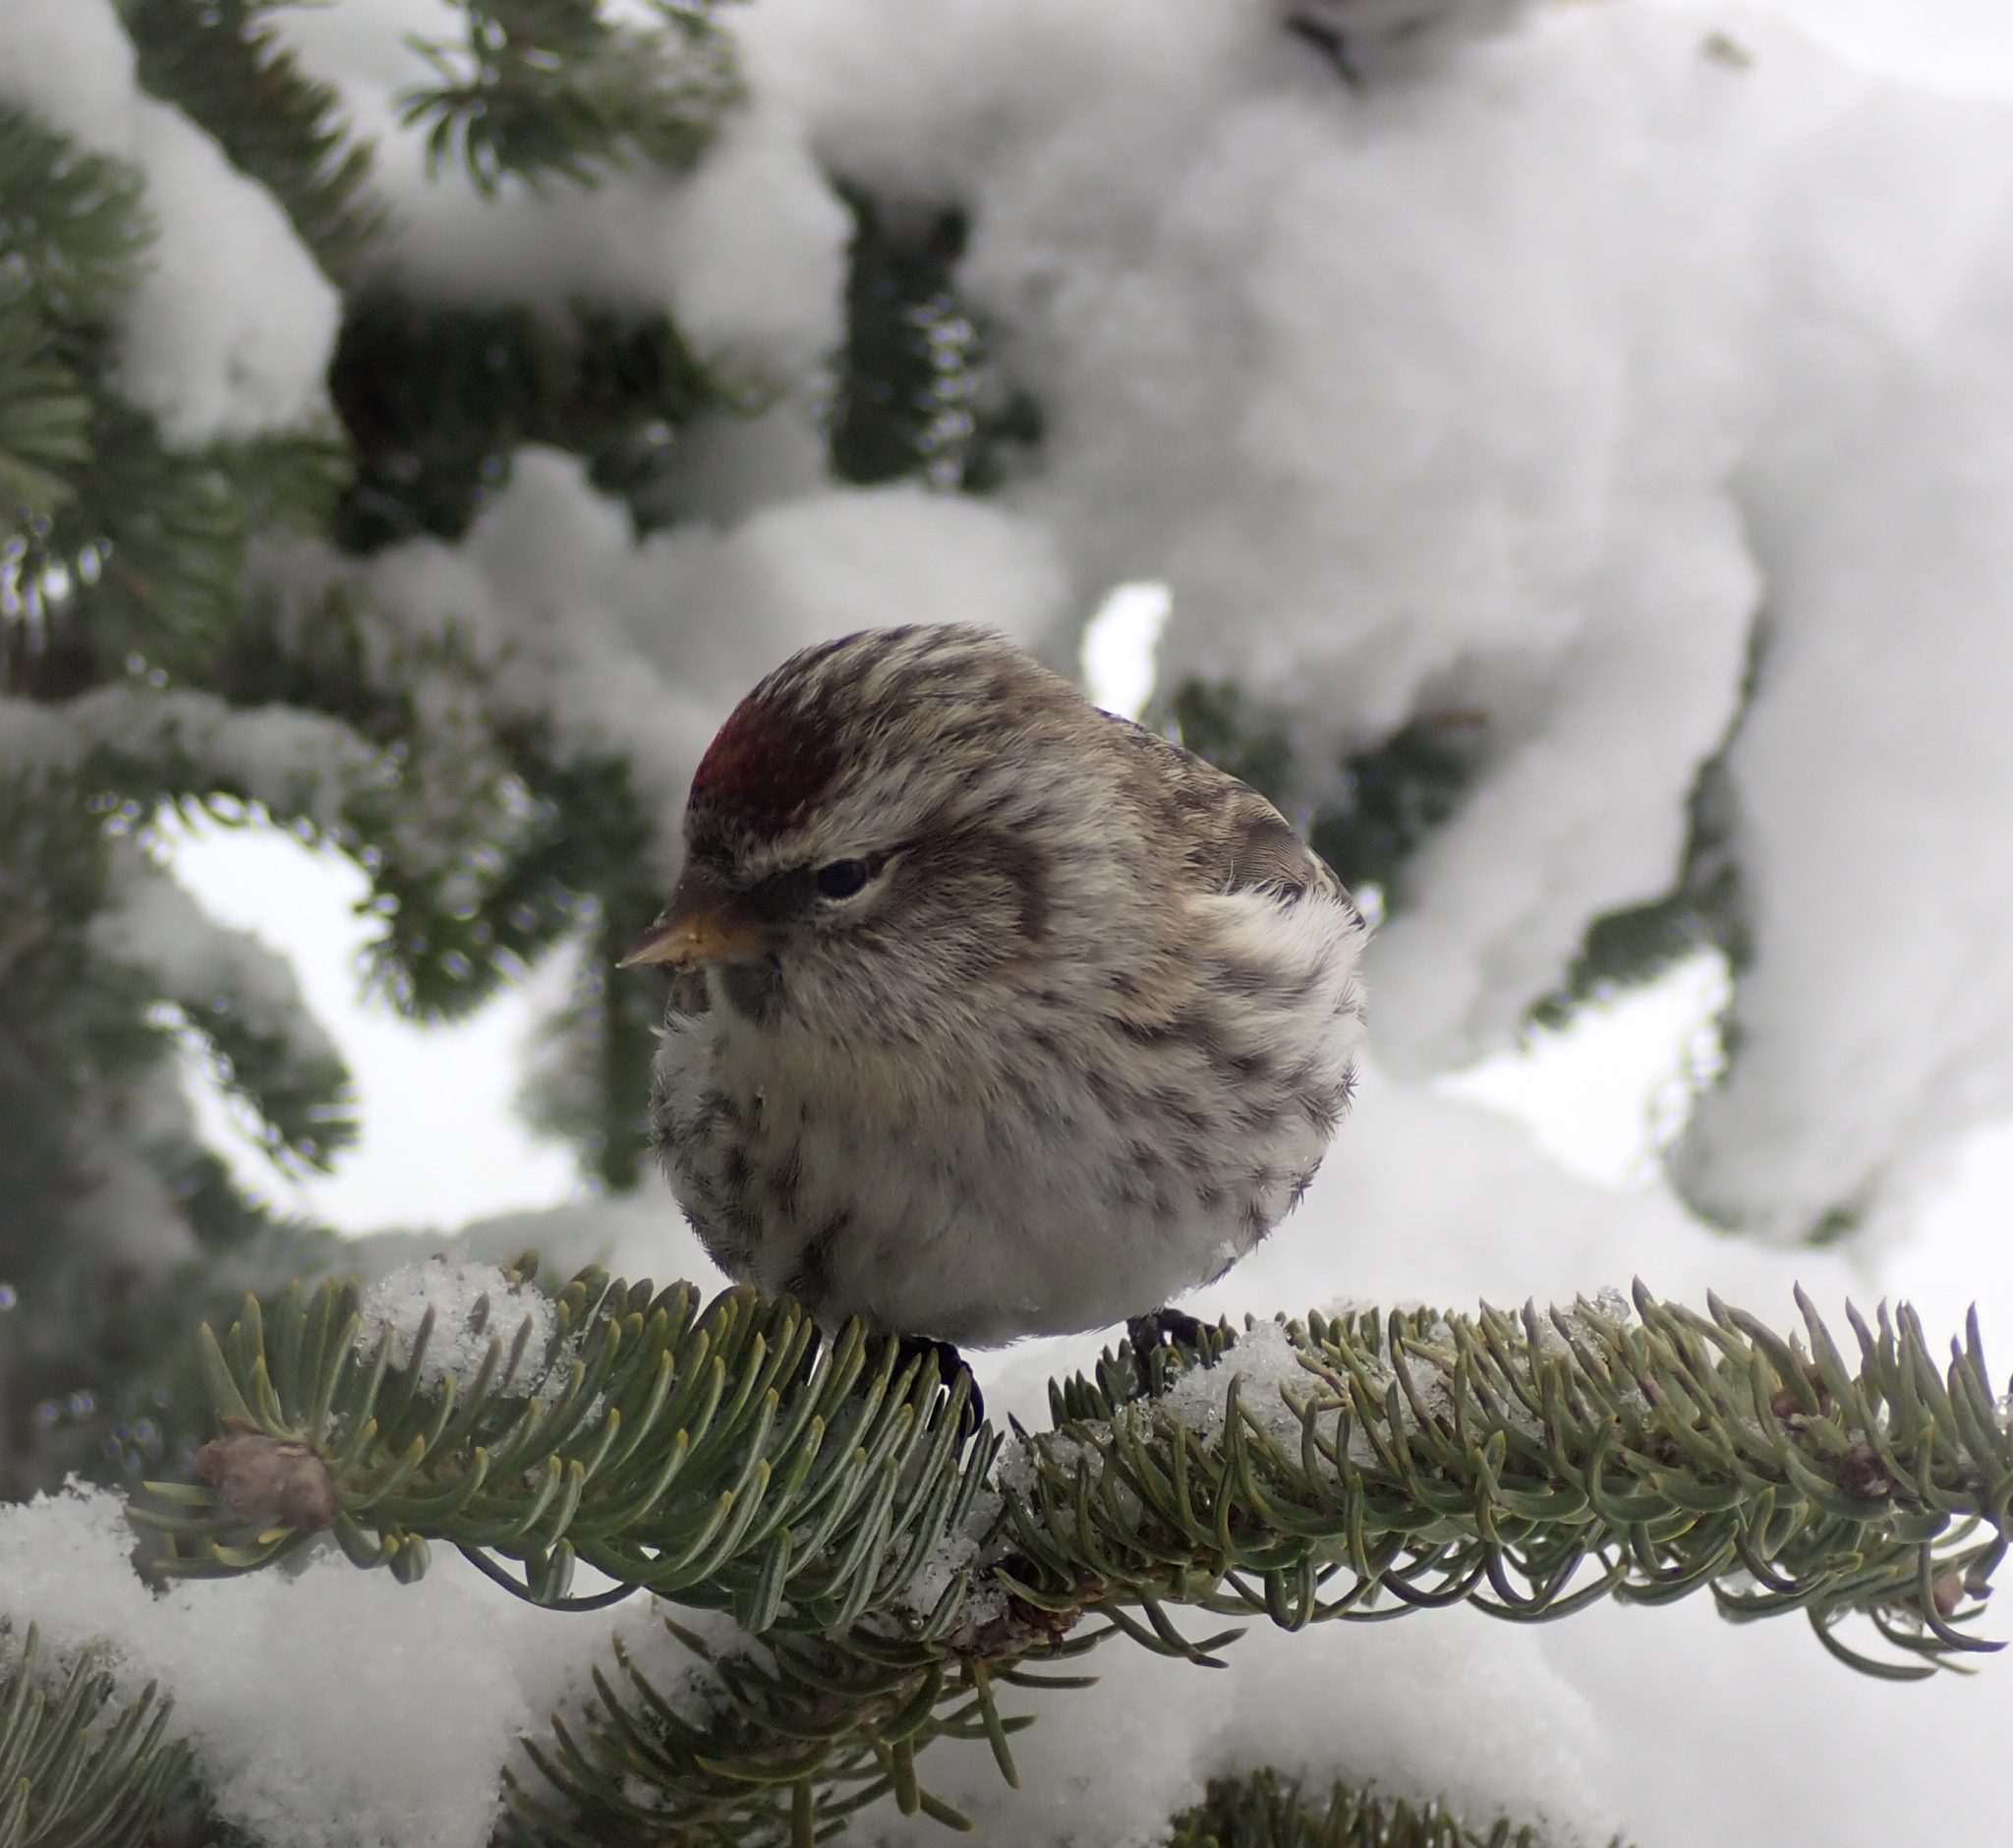 Redpoll (small brown and white bird with reddish patch on forehead, type of finch) perches on a snowy spruce branchlet.